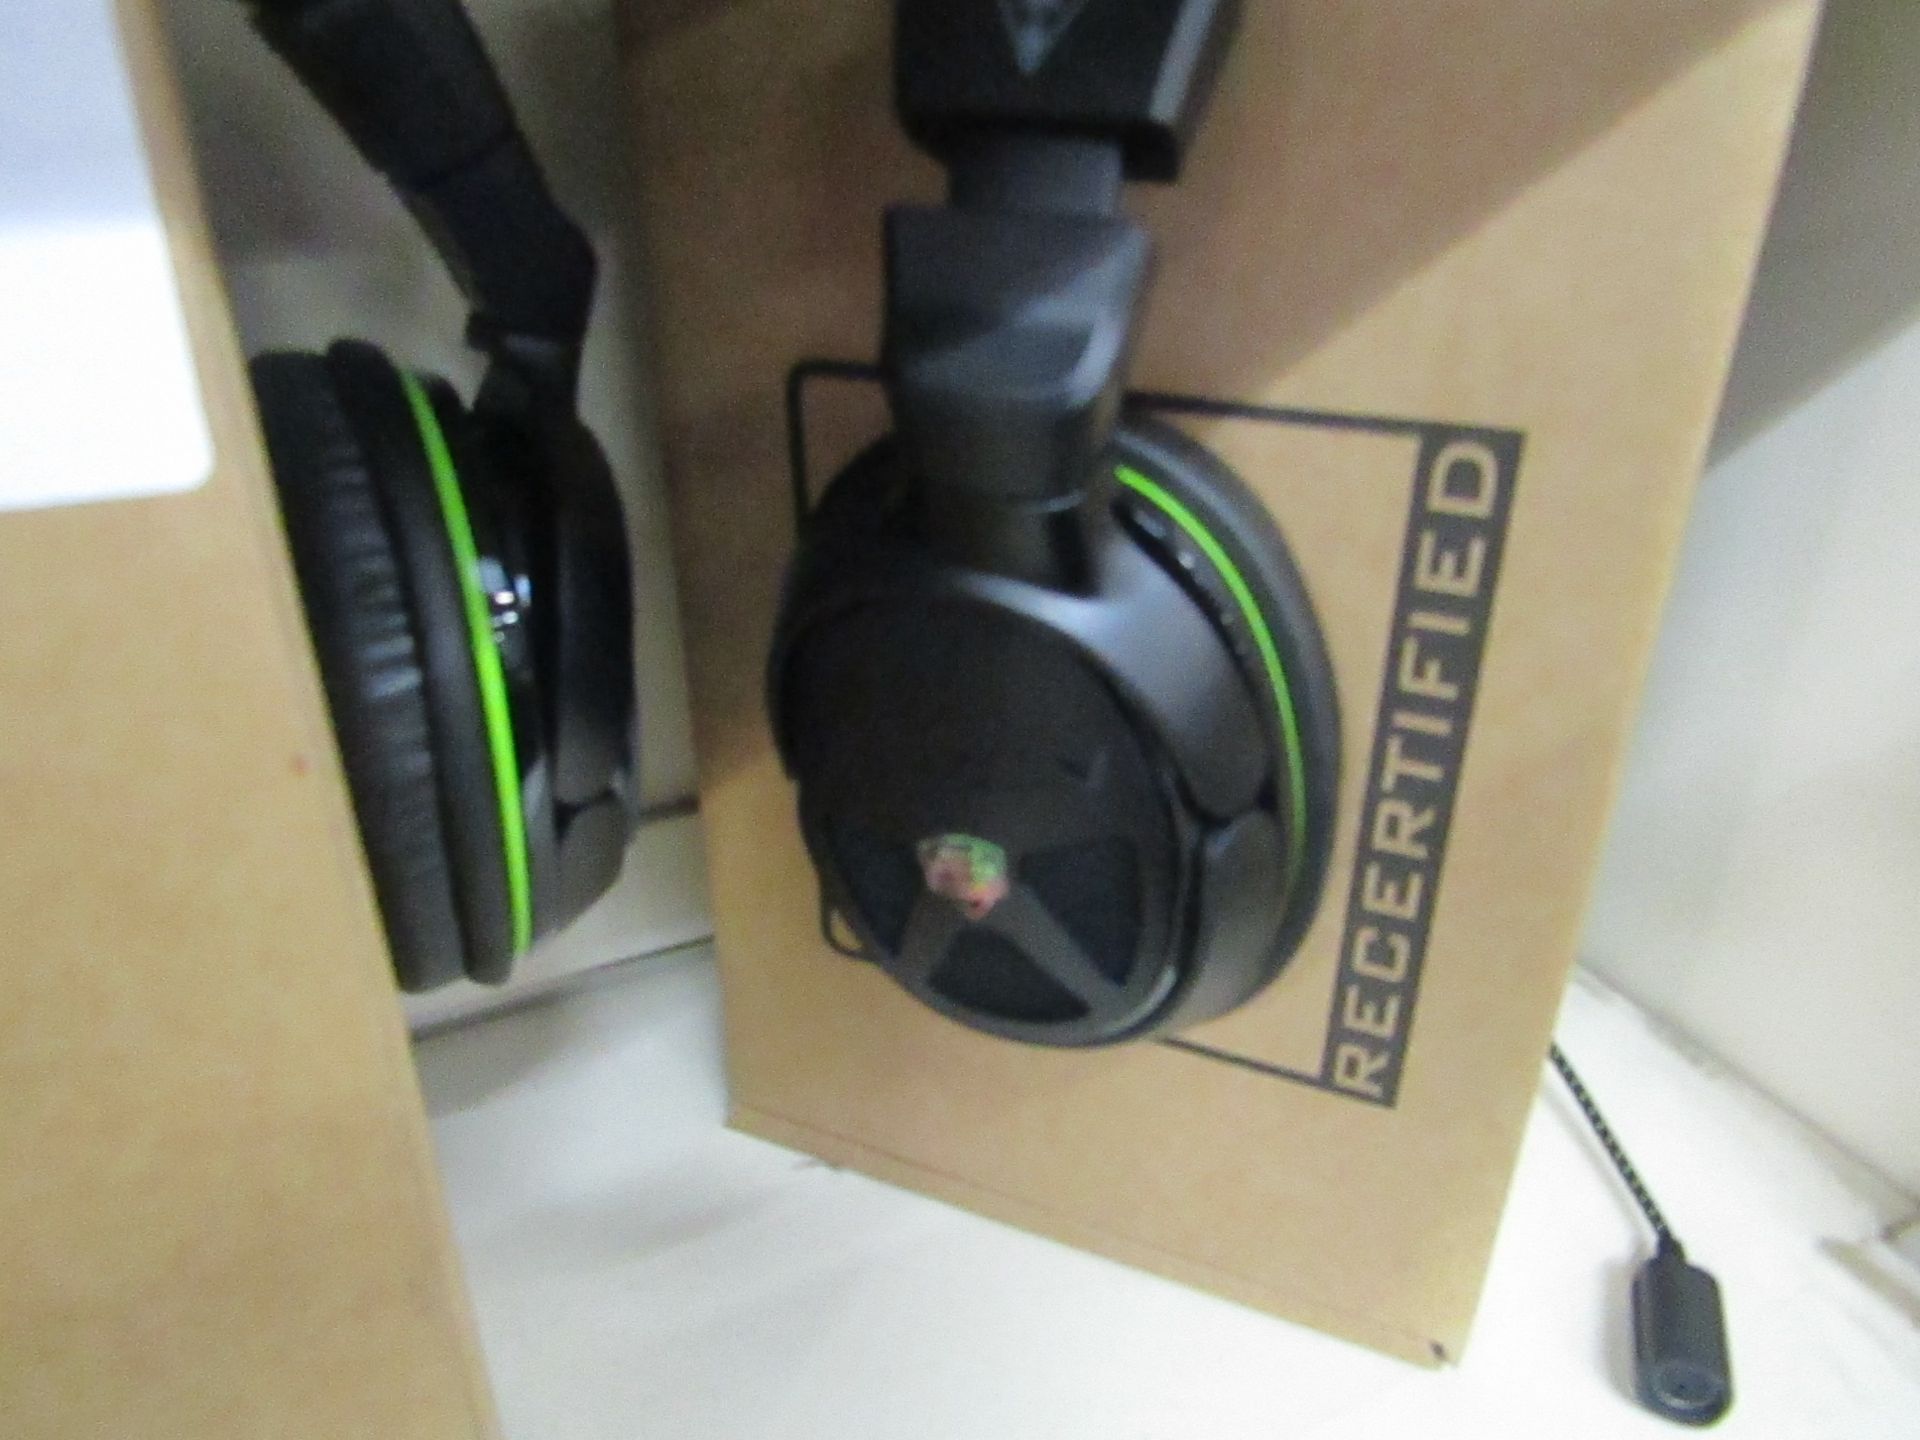 Turtle Beach XL1 gaming headset, tested working and boxed.